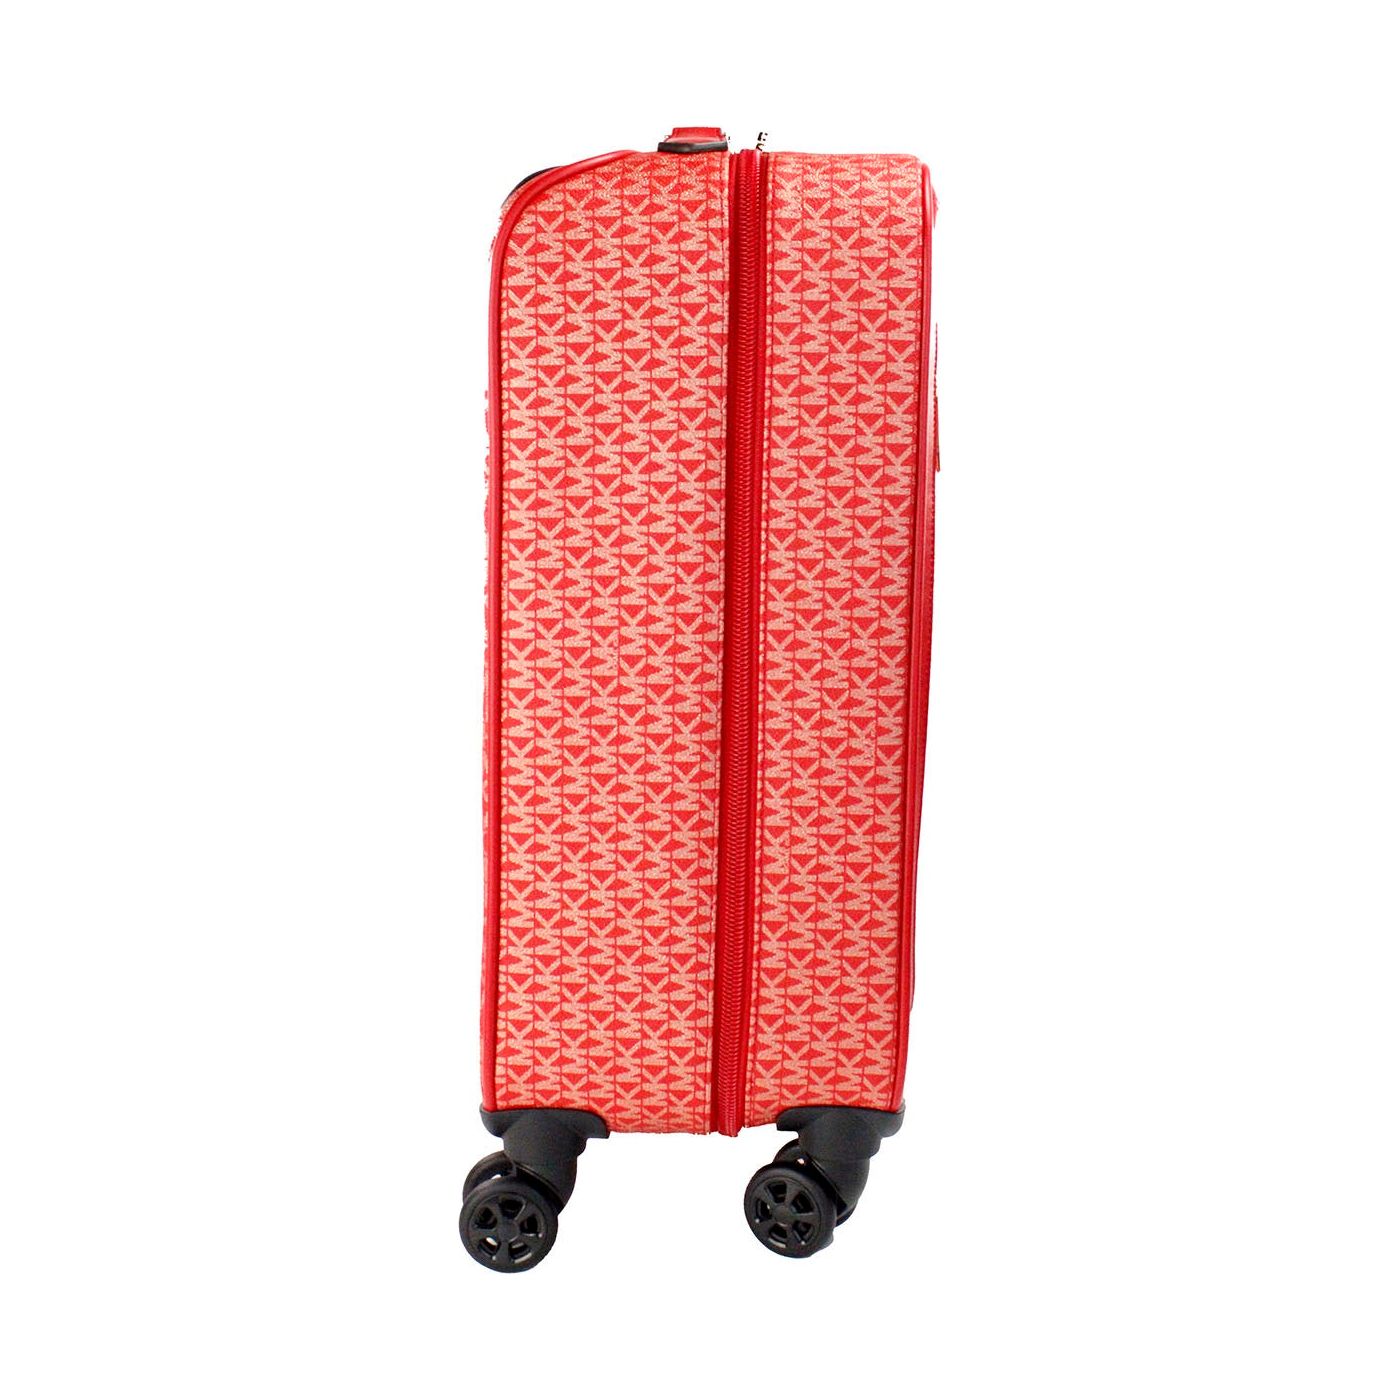 Michael Kors Travel Small Red Signature Trolley Rolling Suitcase Carry On Bag travel-small-red-signature-trolley-rolling-suitcase-carry-on-bag